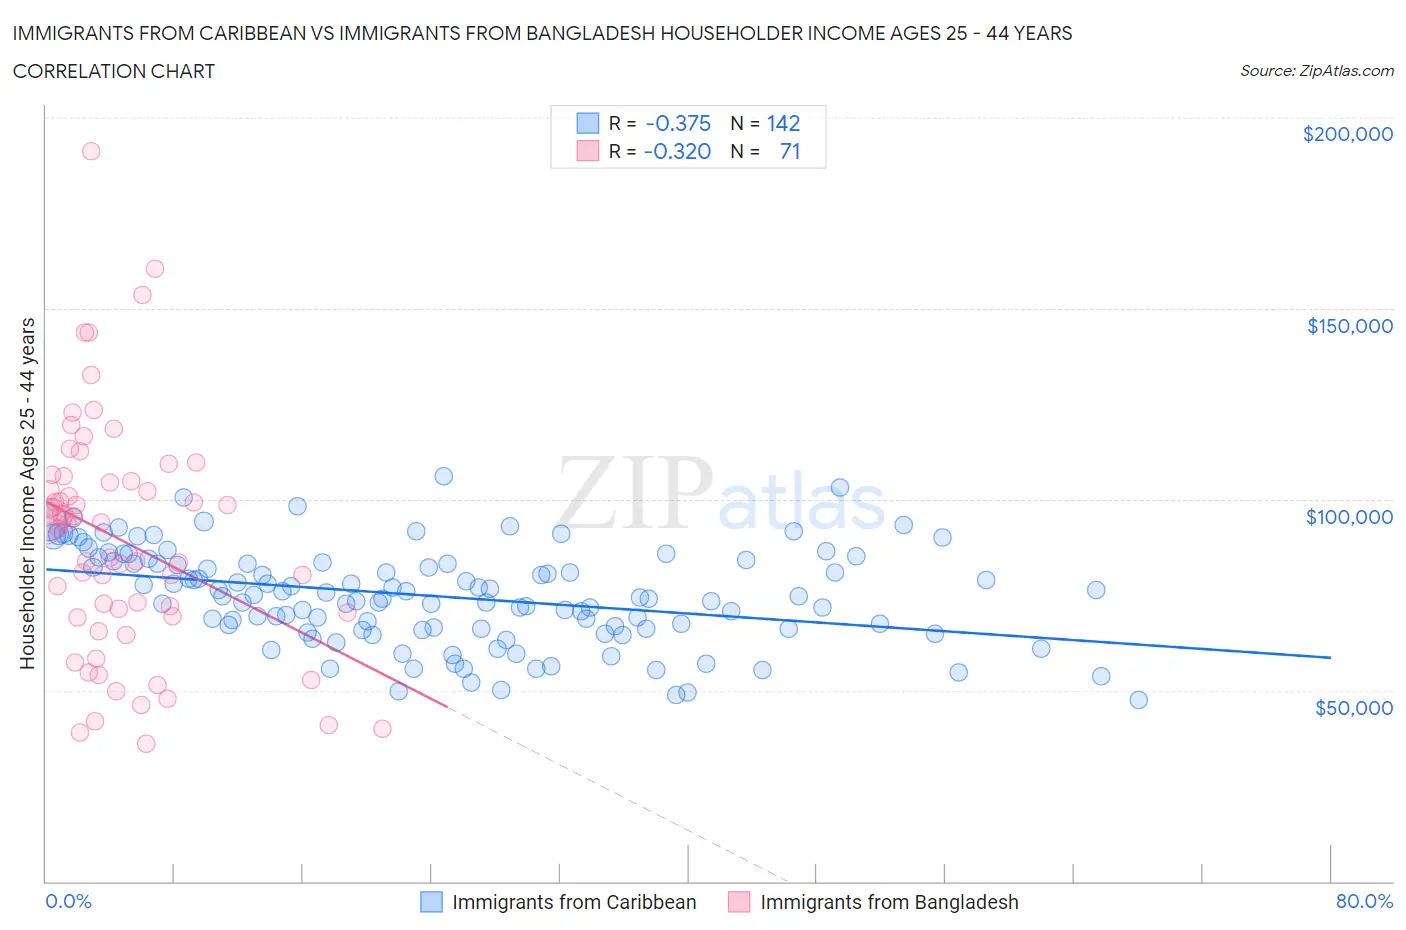 Immigrants from Caribbean vs Immigrants from Bangladesh Householder Income Ages 25 - 44 years